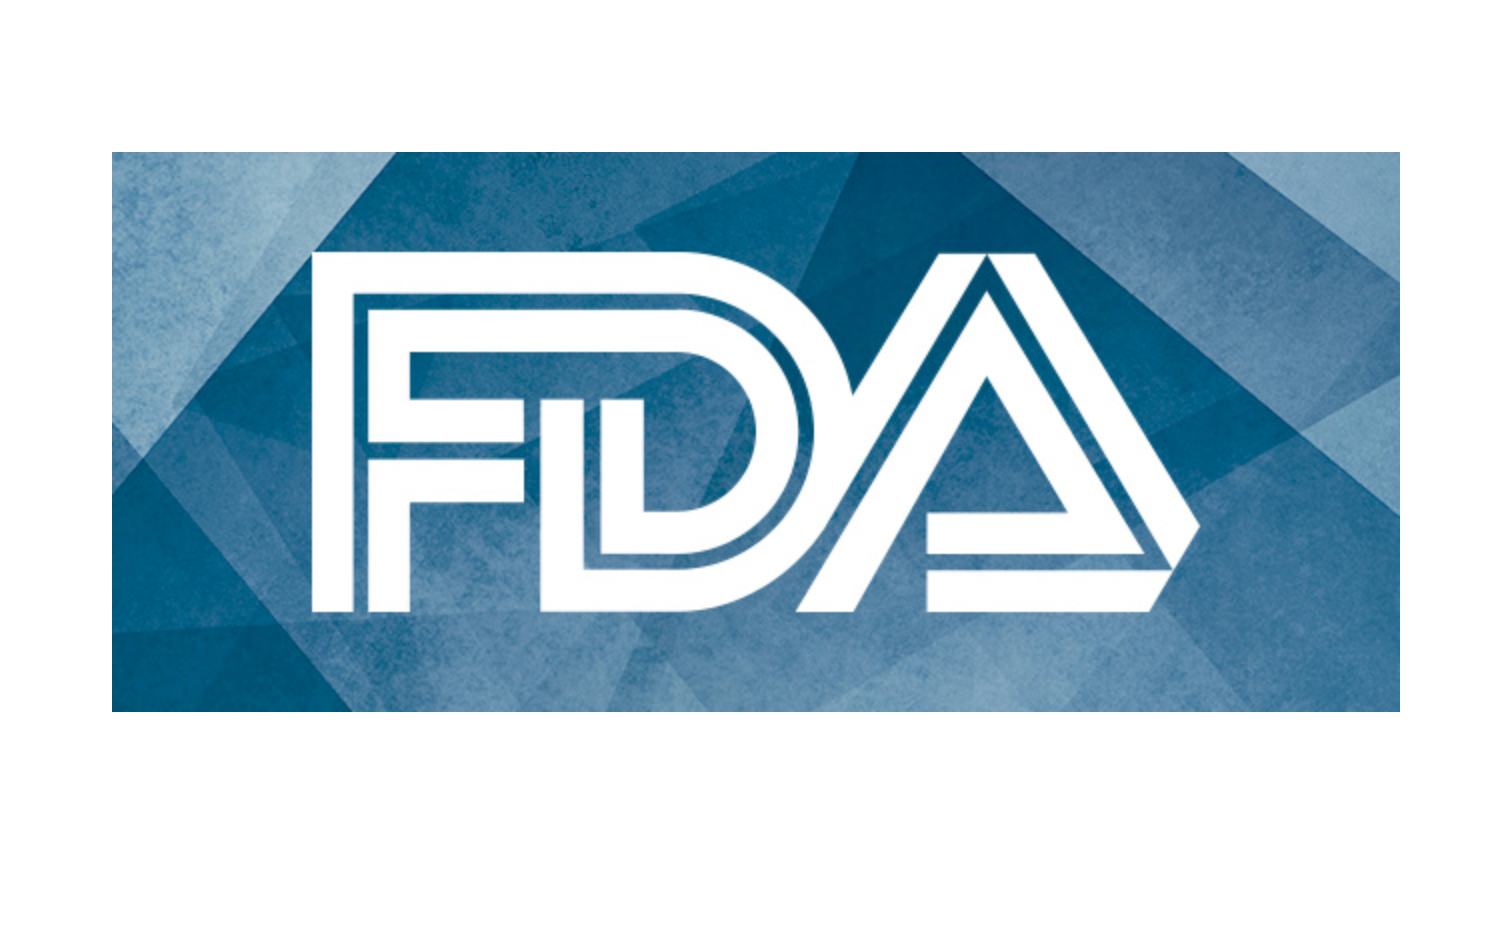 FDA Approves Luspatercept-aamt for First-Line Treatment of Anemia in Adults With Lower-Risk Myelodysplastic Syndromes